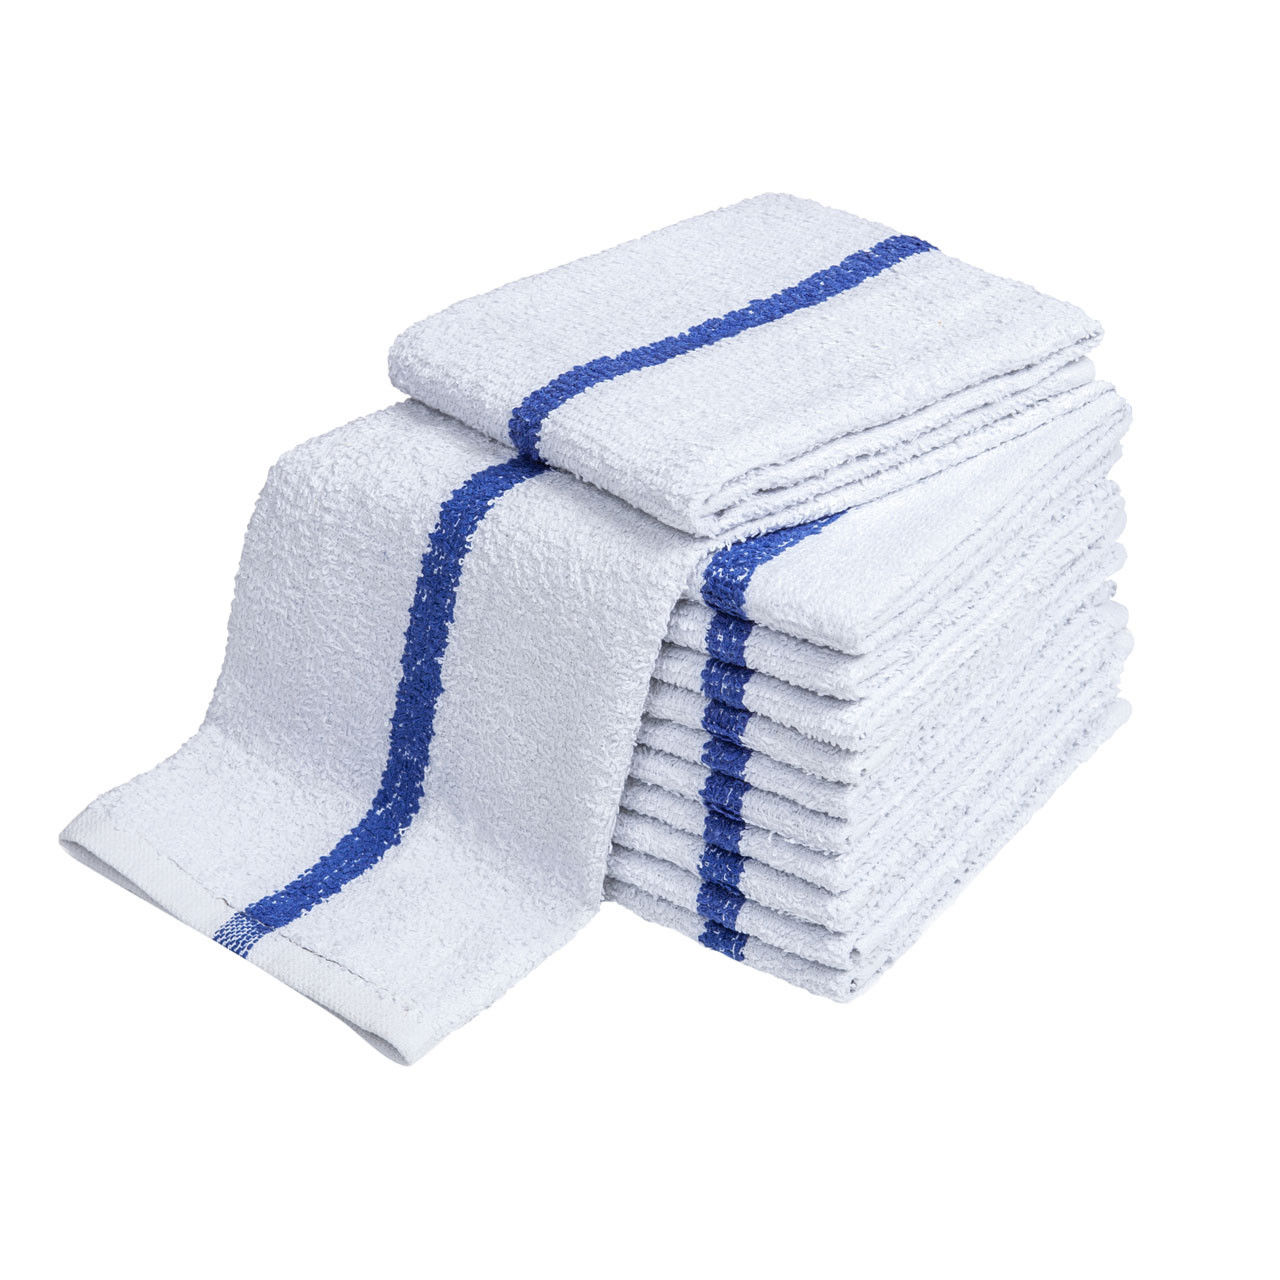 What are the parts of a terry towel?